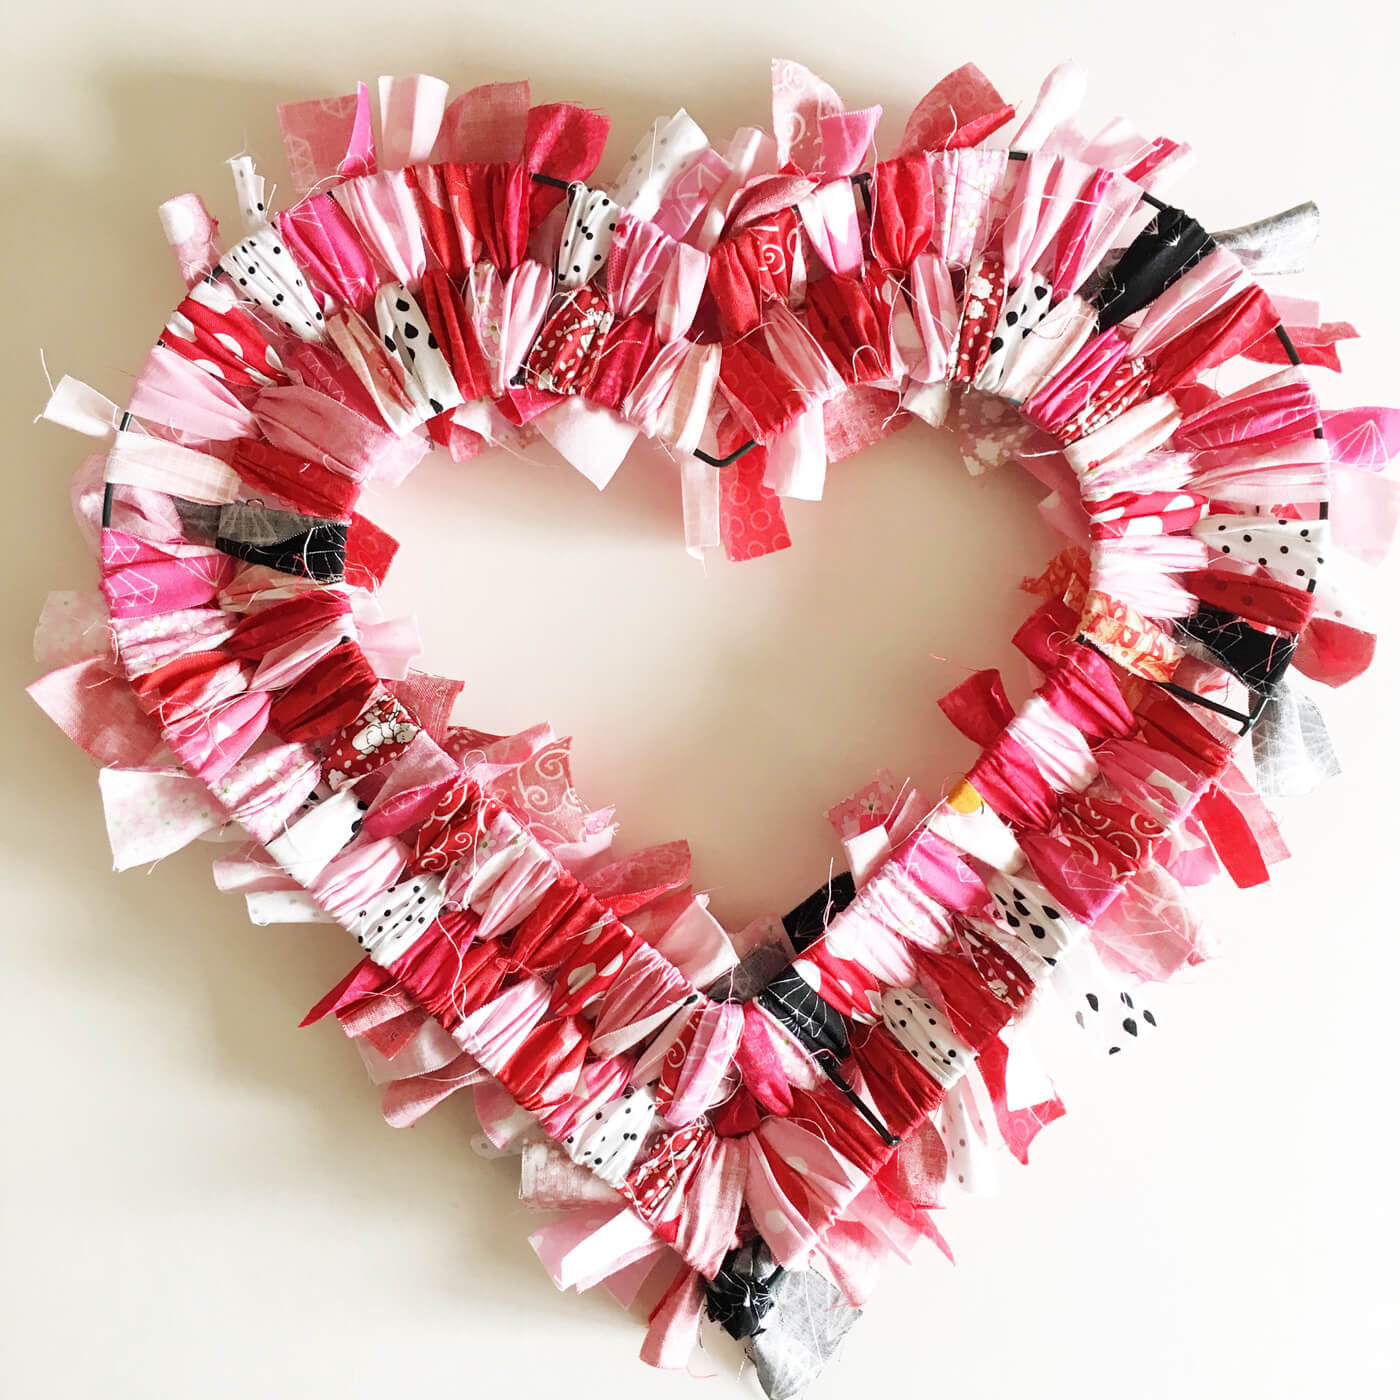 Get Best Valentine Wreath Ideas and Make This Day Special